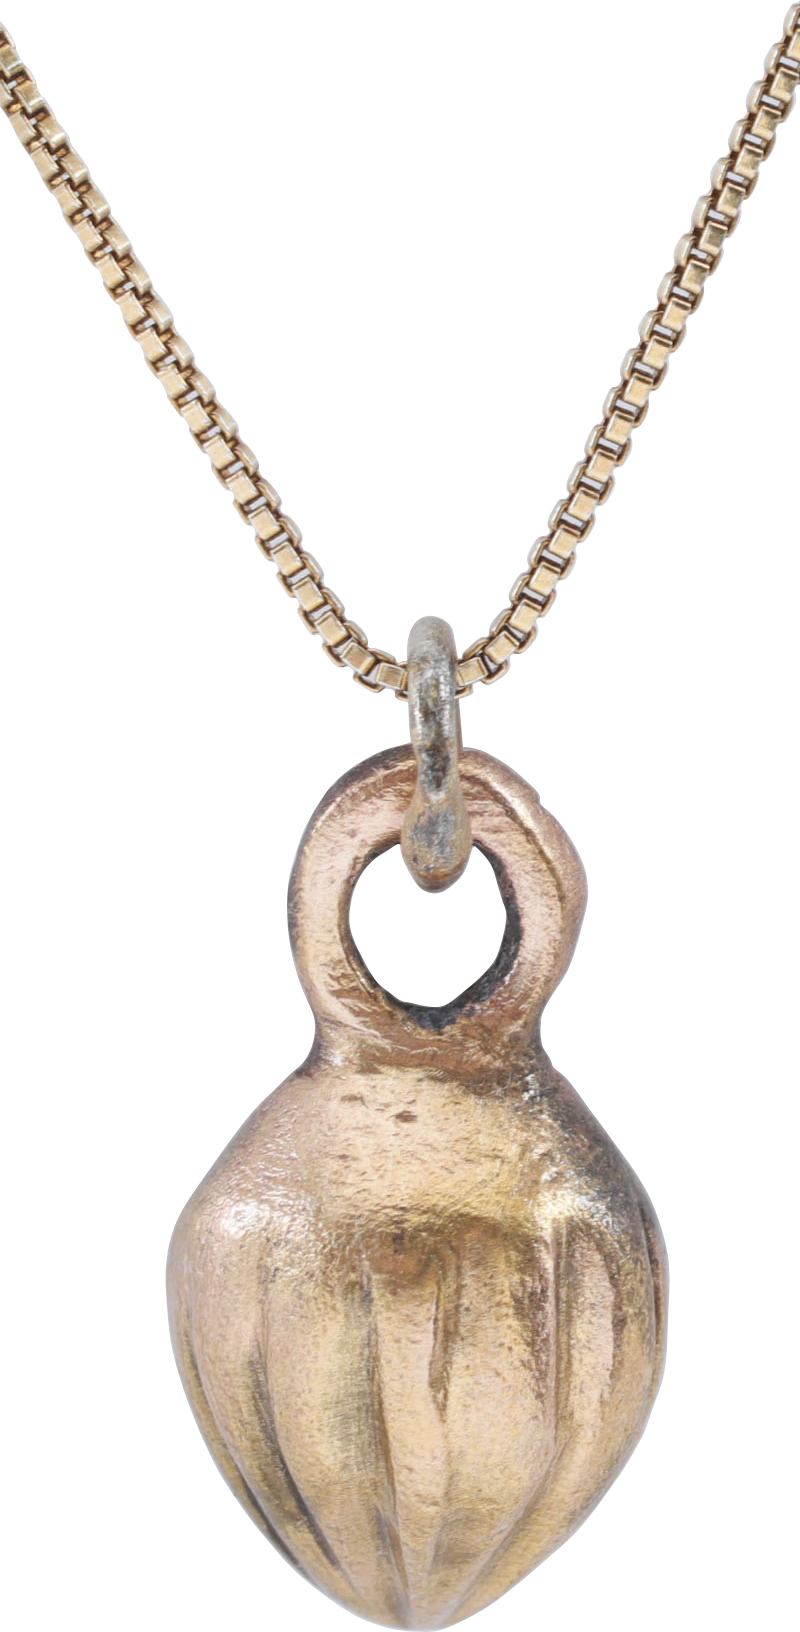 ANCIENT ROMAN SHELL PENDANT NECKLACE C.100-350 AD - Picardi Jewelry